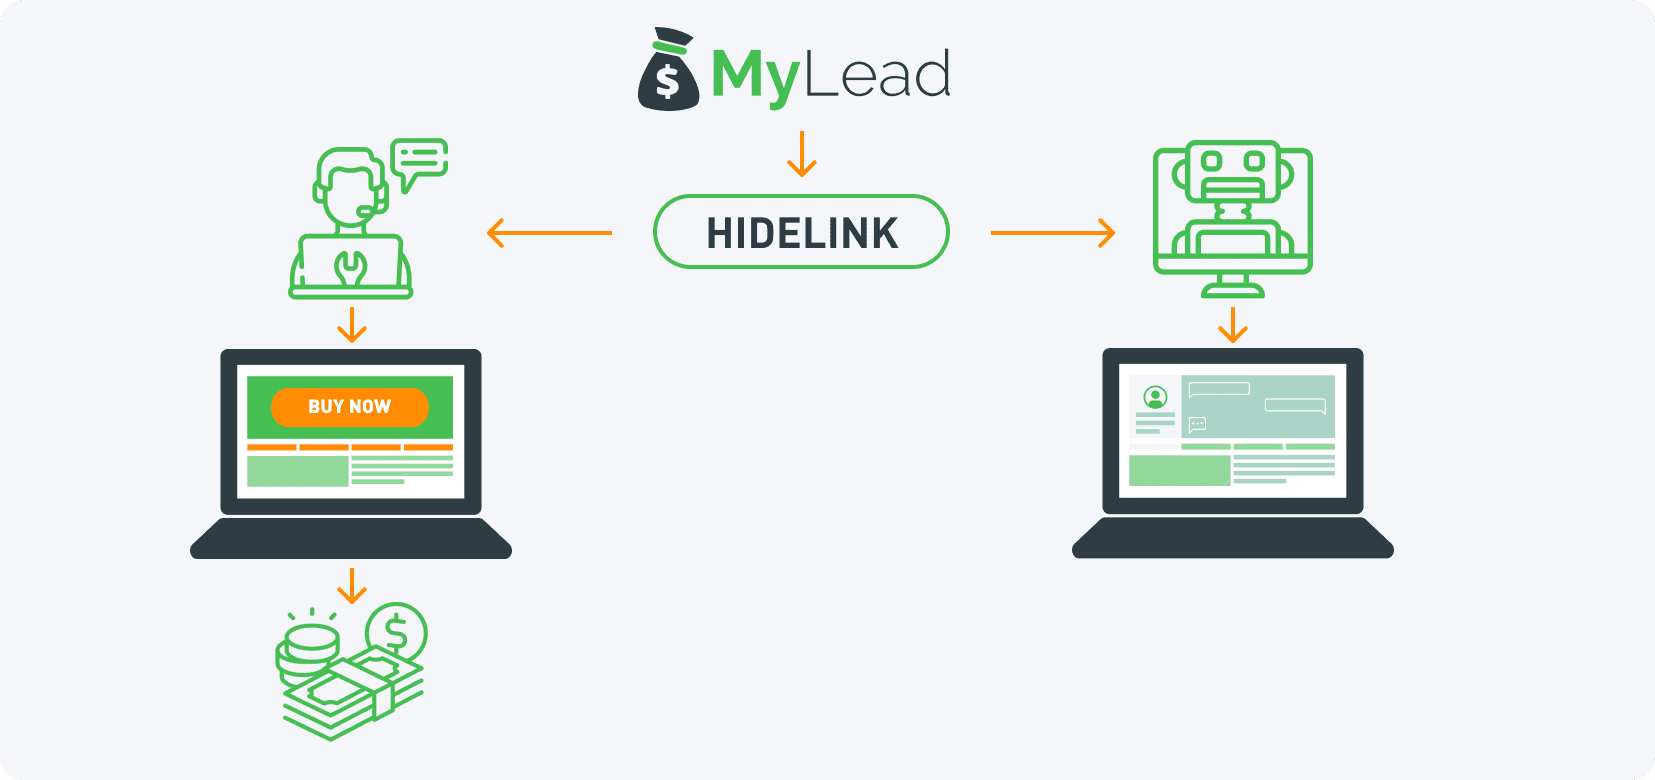 HideLink - a cloaking system from MyLead